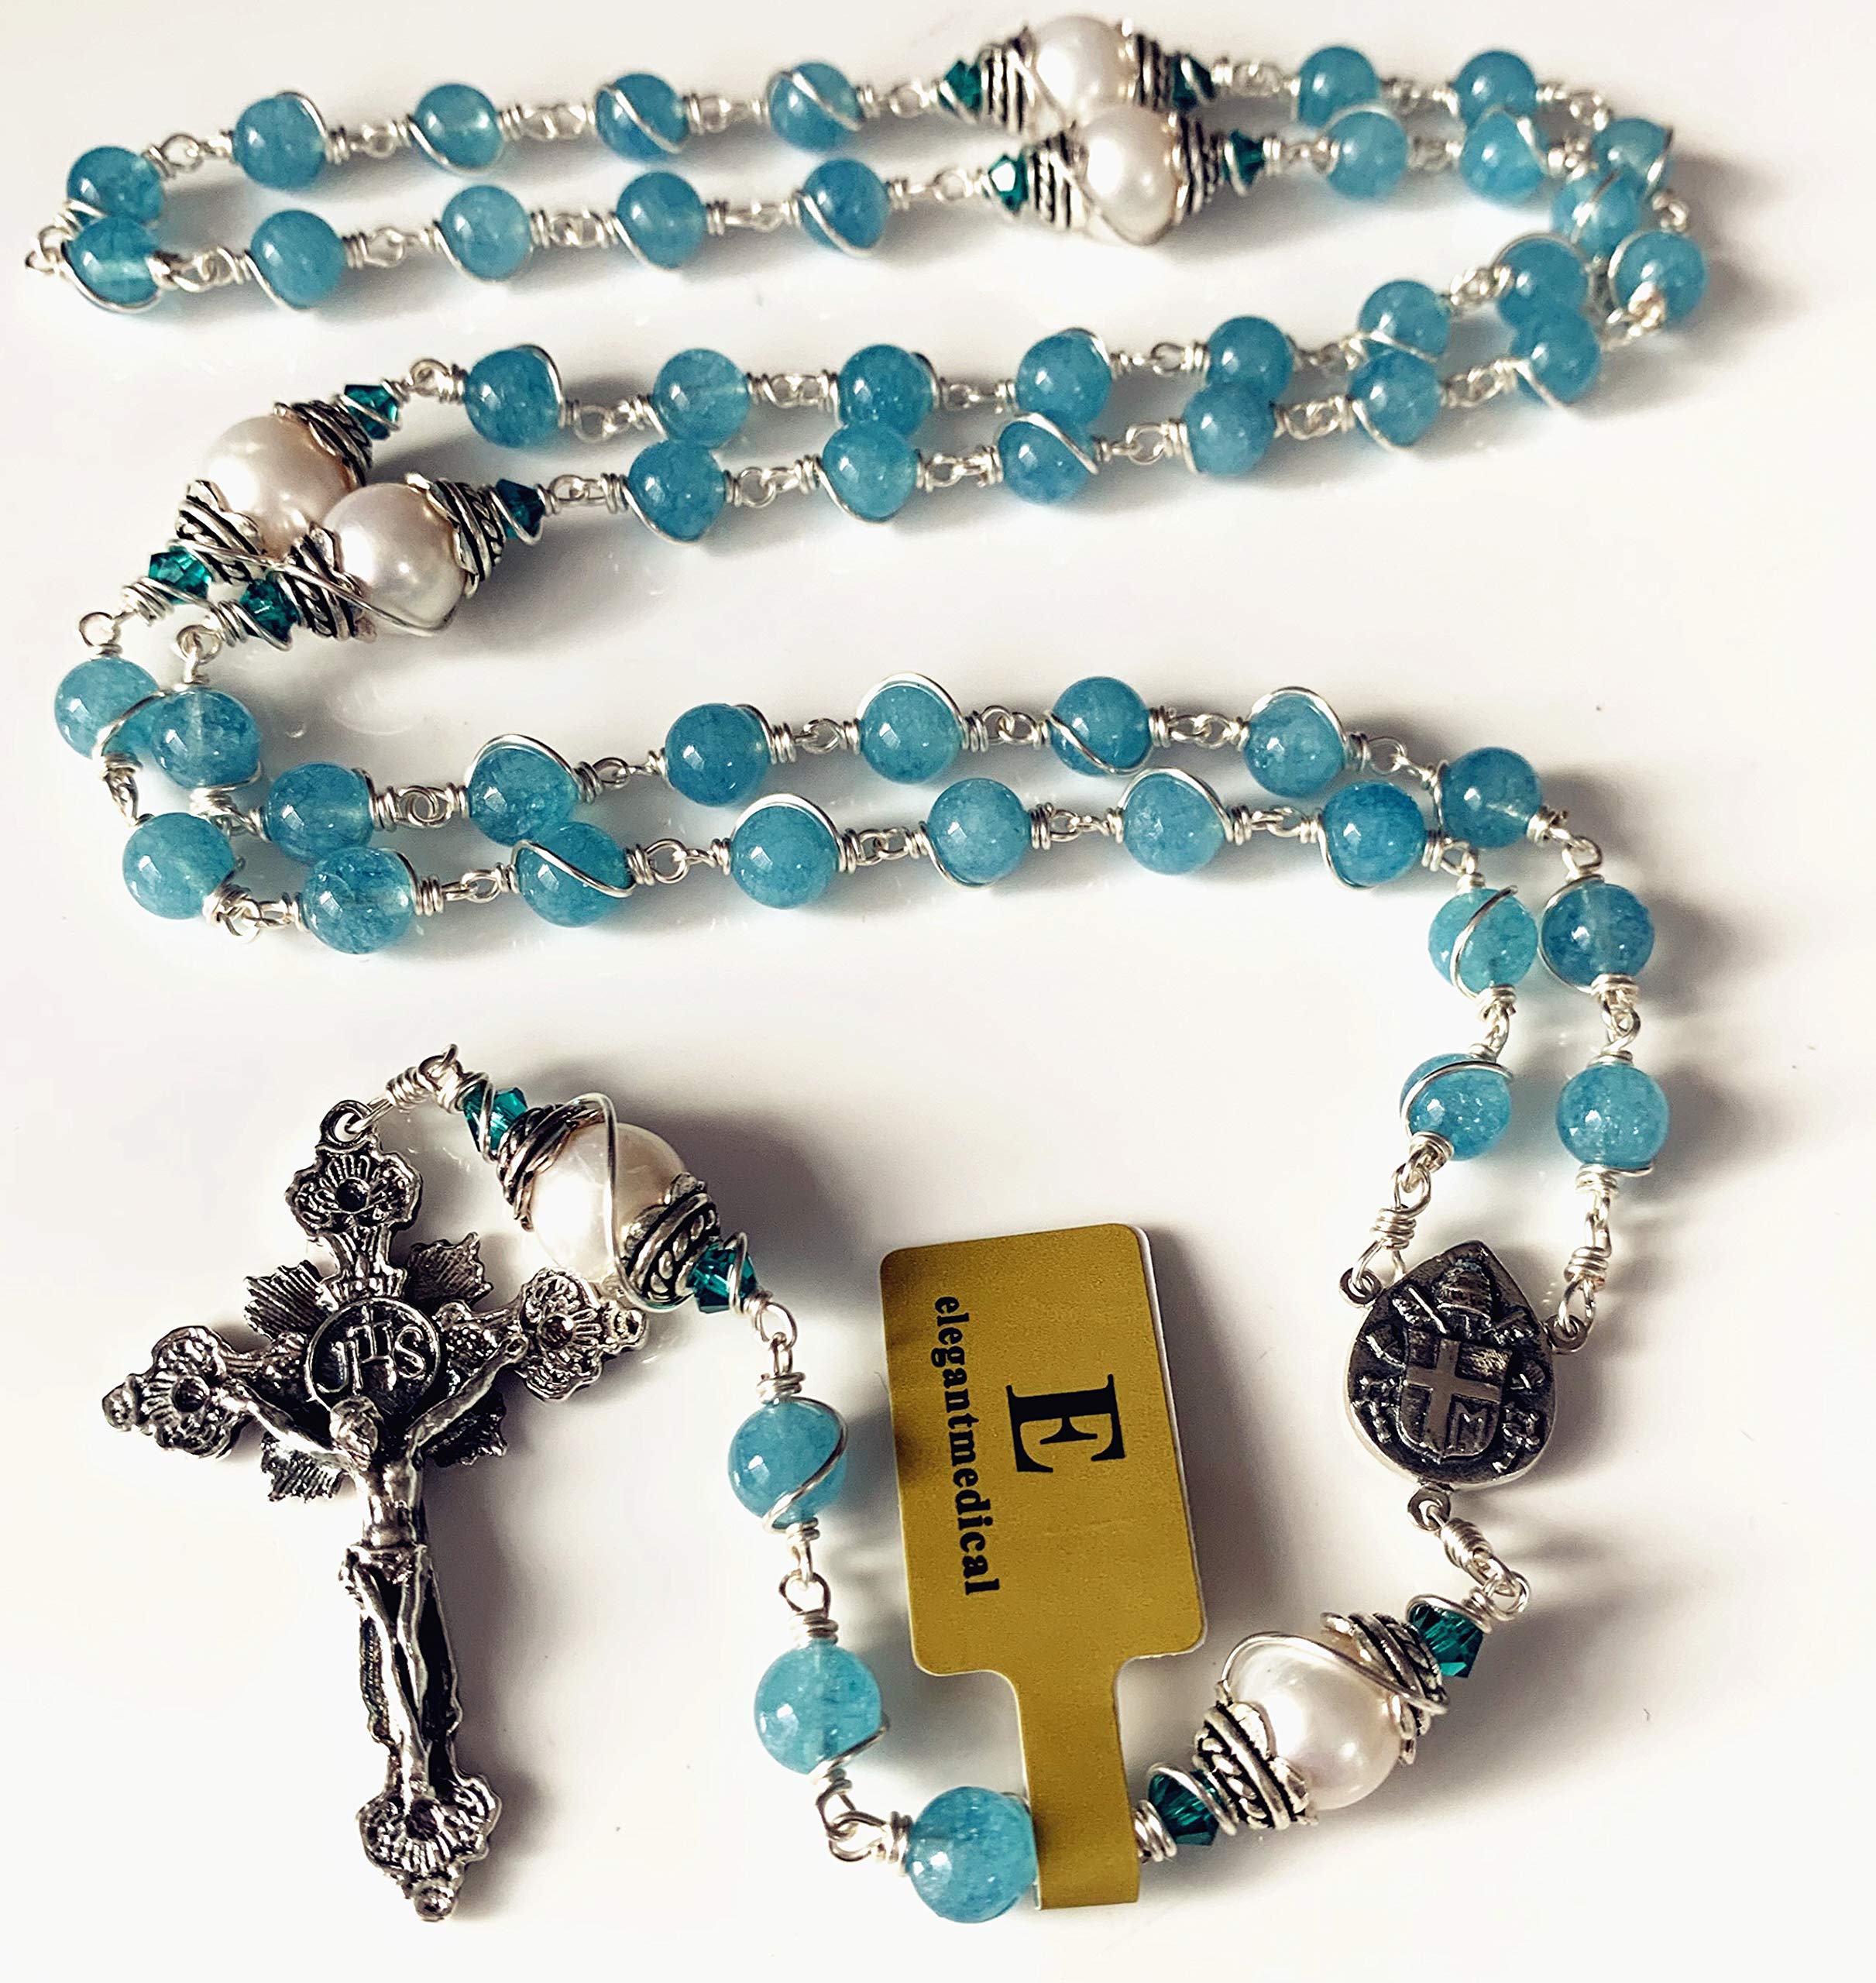 elegantmedical HANDMADE Sterling Silver Wire Wraped Aquamarine & AAA10MM Real Pearl BEADS 5 DECADE ROSARY Cross crucifix necklace